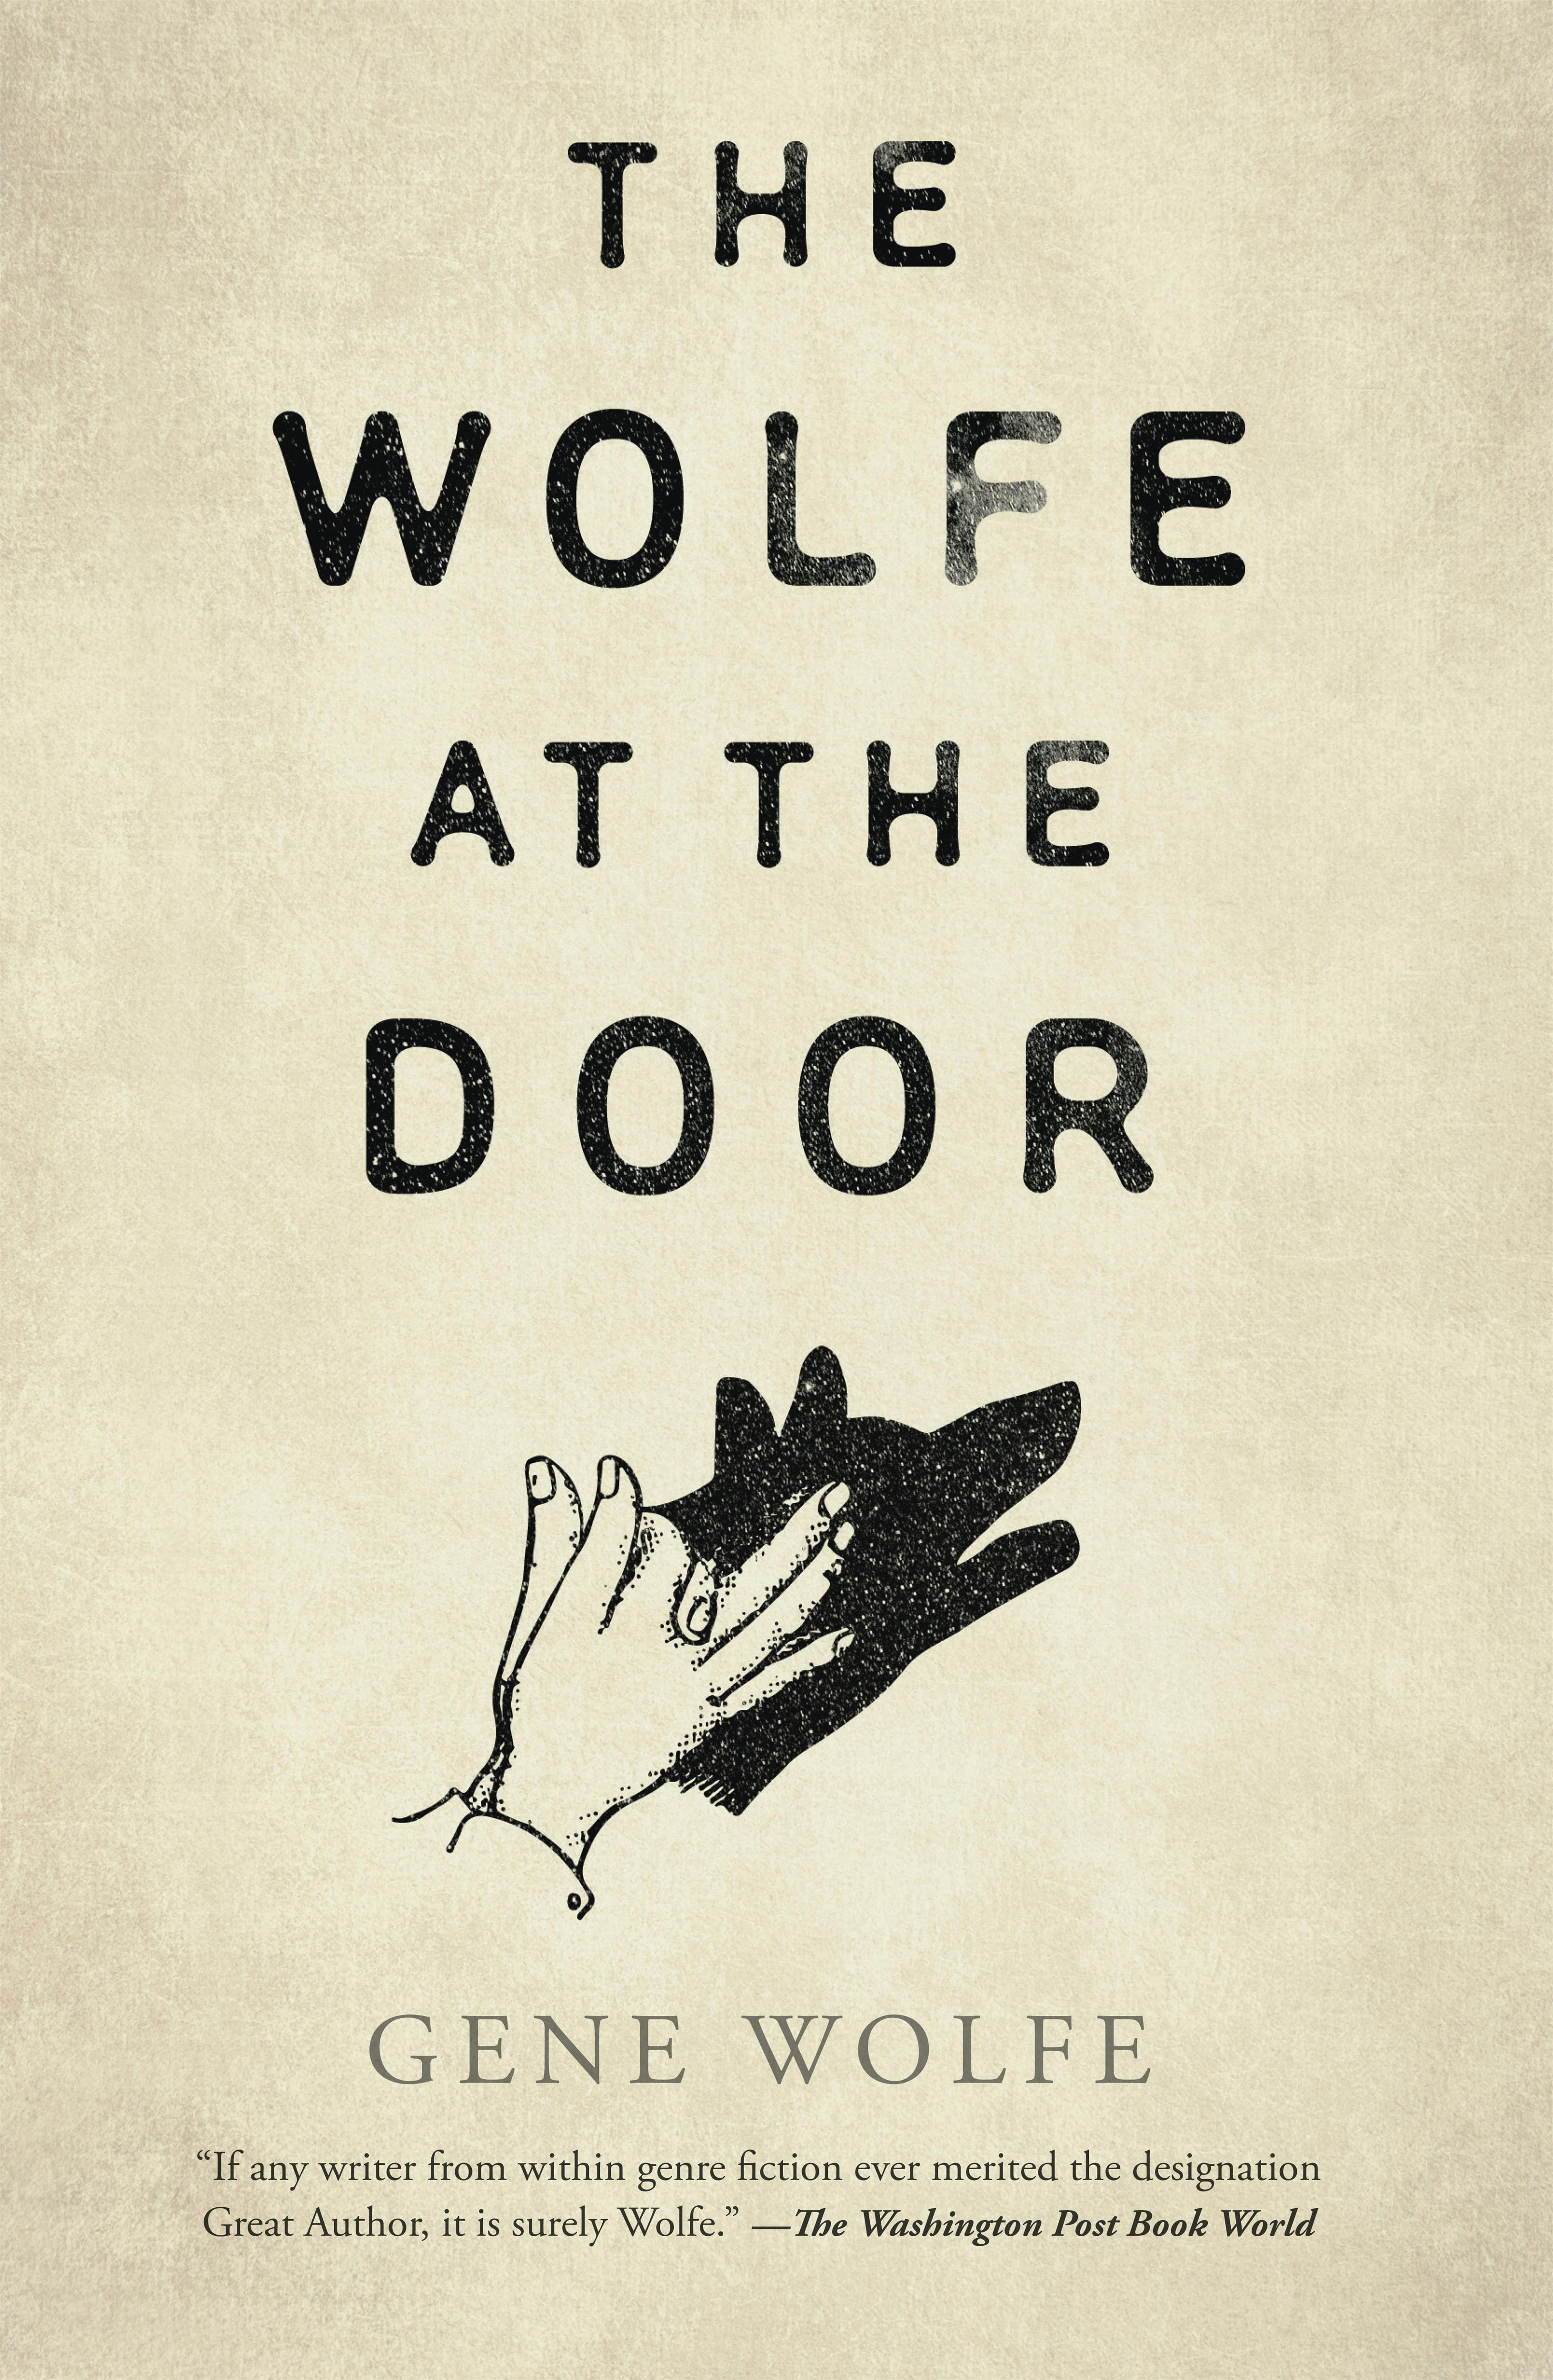 Cover for the book titled as: The Wolfe at the Door